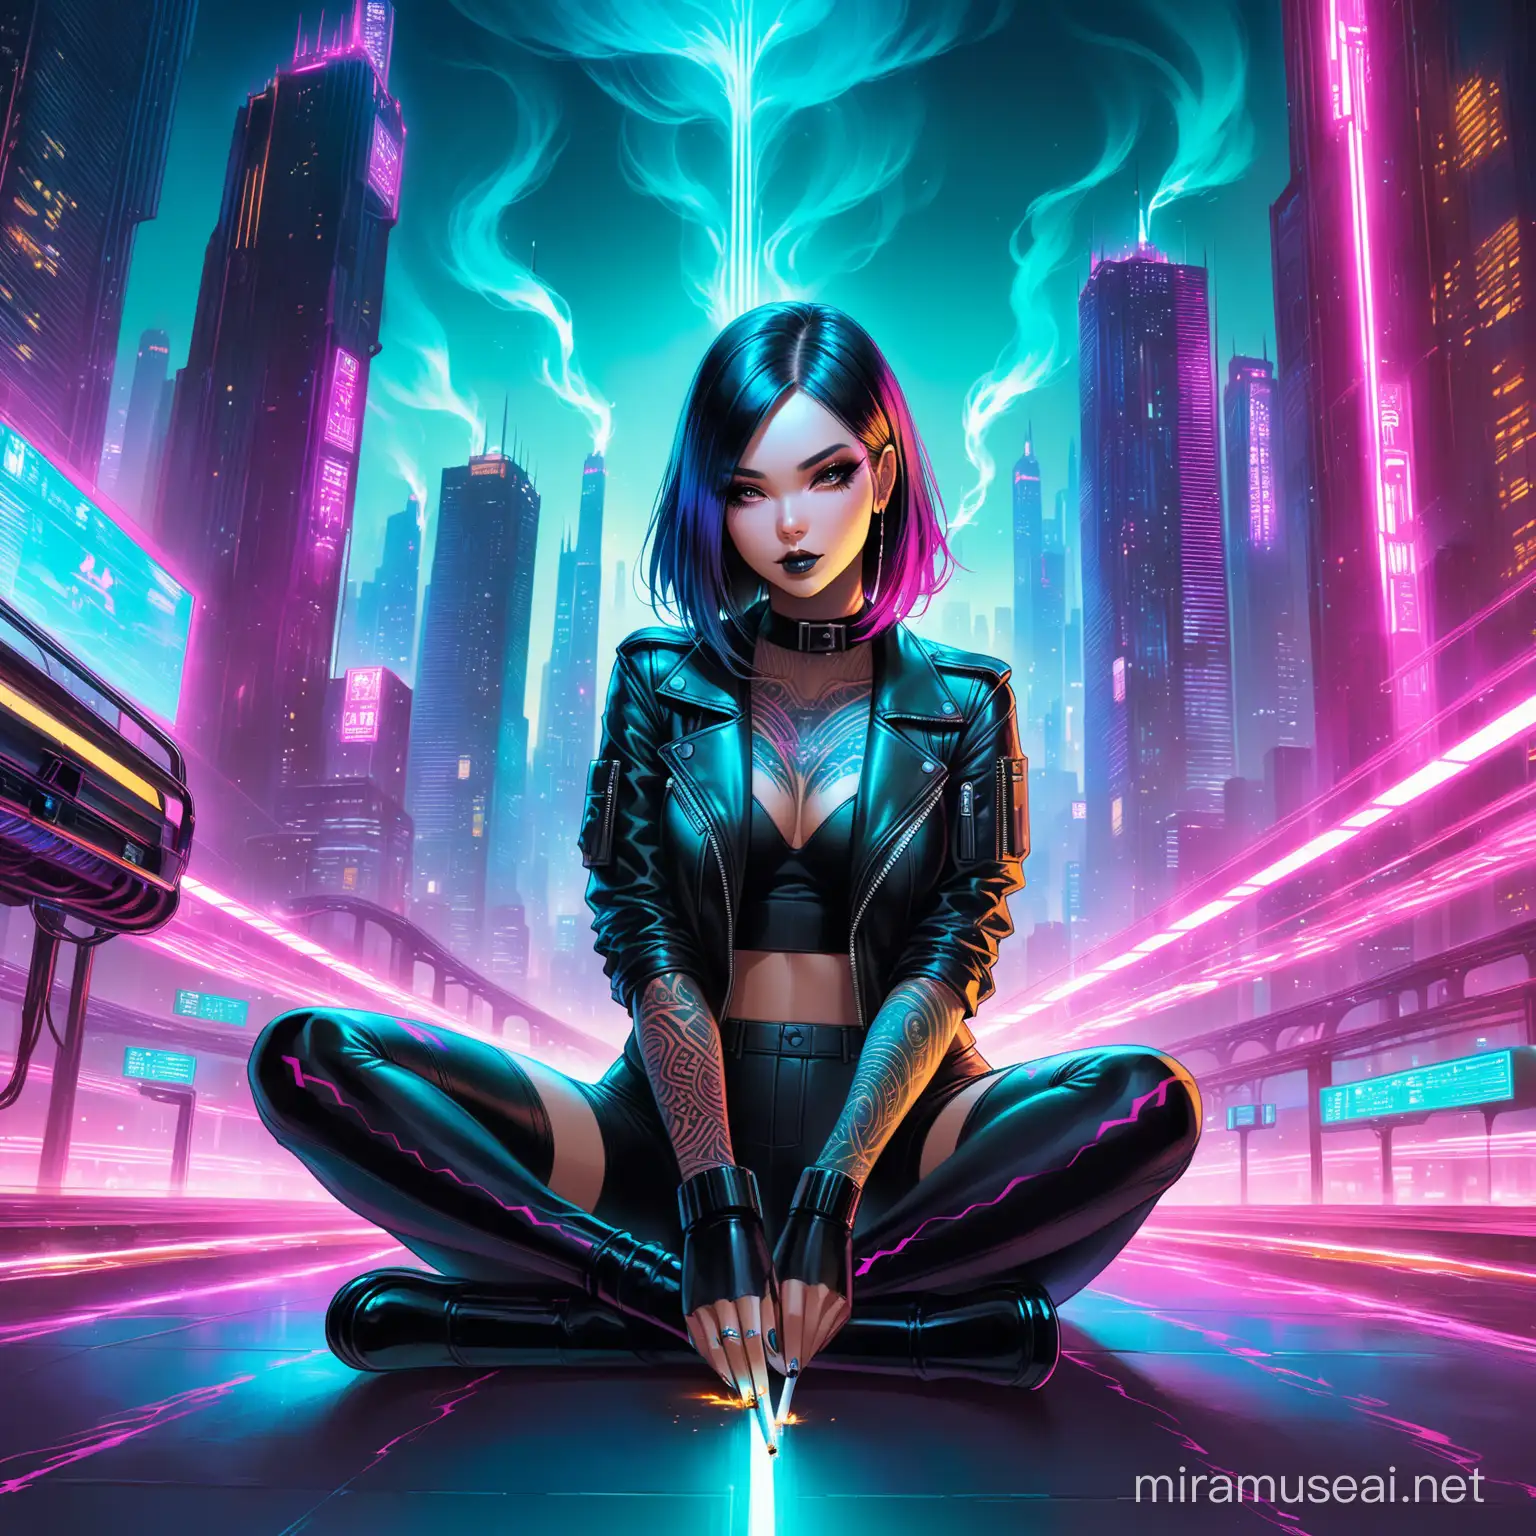 (A striking, cyberpunk-inspired painting of a gothic woman sitting on the ground. She wears a black leather jacket with intricate tattoos covering her arms, and her face is adorned with dark makeup. She casually lsmokes a cigarette, exhaling a trail of smoke in the air. The background reveals a neon-lit cityscape, with towering buildings and a futuristic highway. The painting is highly detailed, showcasing the artist's skill in capturing textures and light. It is a lowbrow masterpiece, created by the talented Ross Tran and shared on the CGSociety platform.). Flawless face,Wajah menghadap kamera,hyperrealistis,uhd32k,jernih,jelas,detail,full body,perfect anatomy